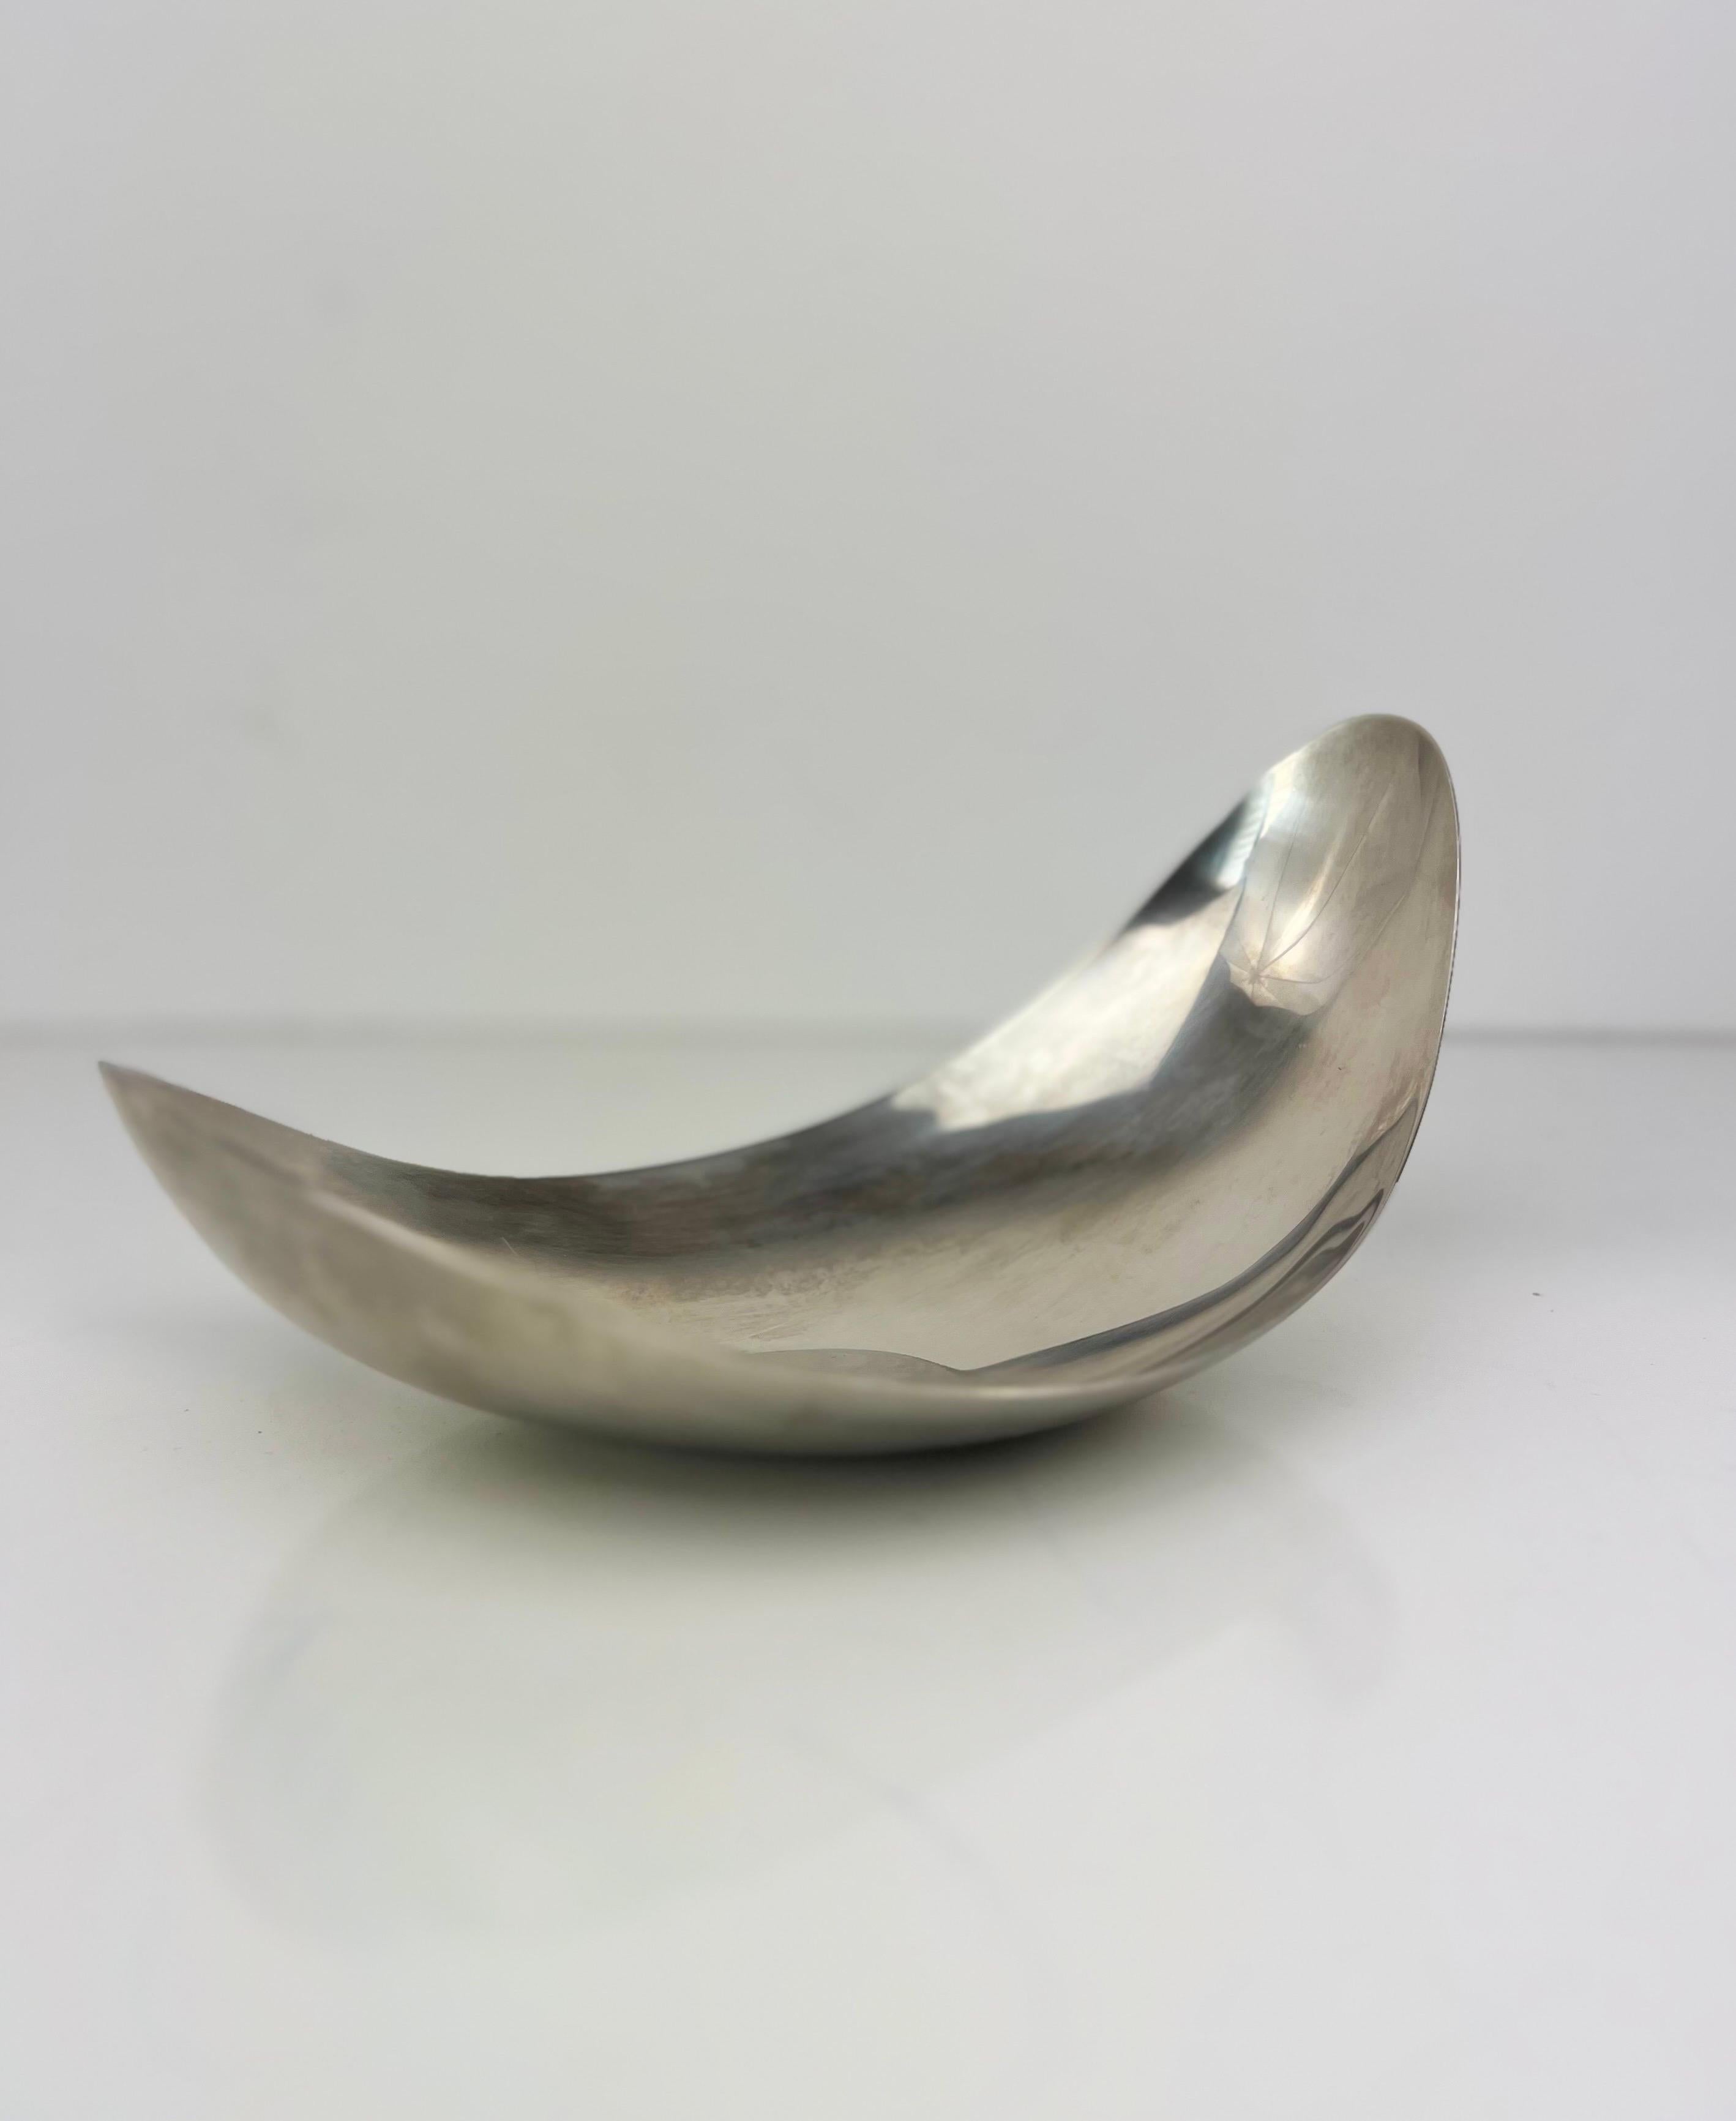 Organic modern mid century bowl by artist Georg Jensen.  The brushed stainless steel curved design reflects light in the most stunning way.  Made in Denmark.  The shape is inspired by the magnolia flower. Stamped George Jensen on the bottom. 